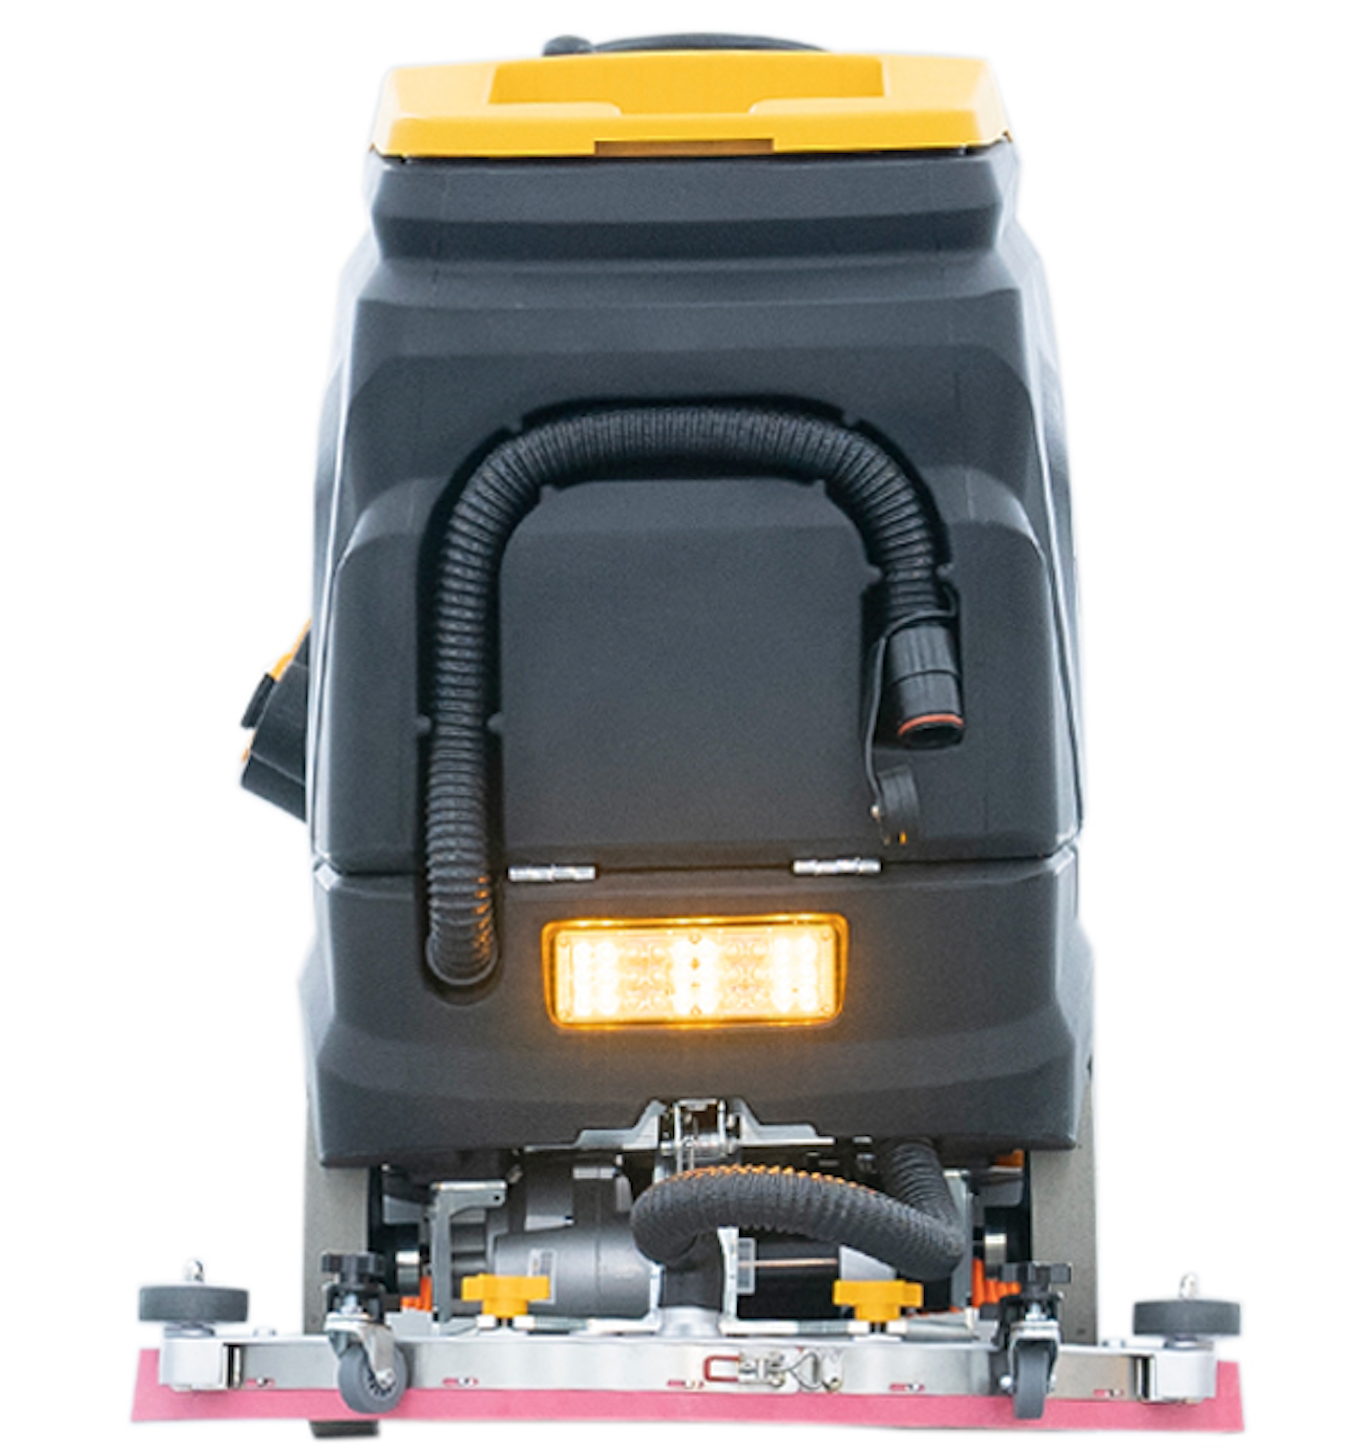 Ride-On Floor Scrubber CR21 with a Complete Set of Parts